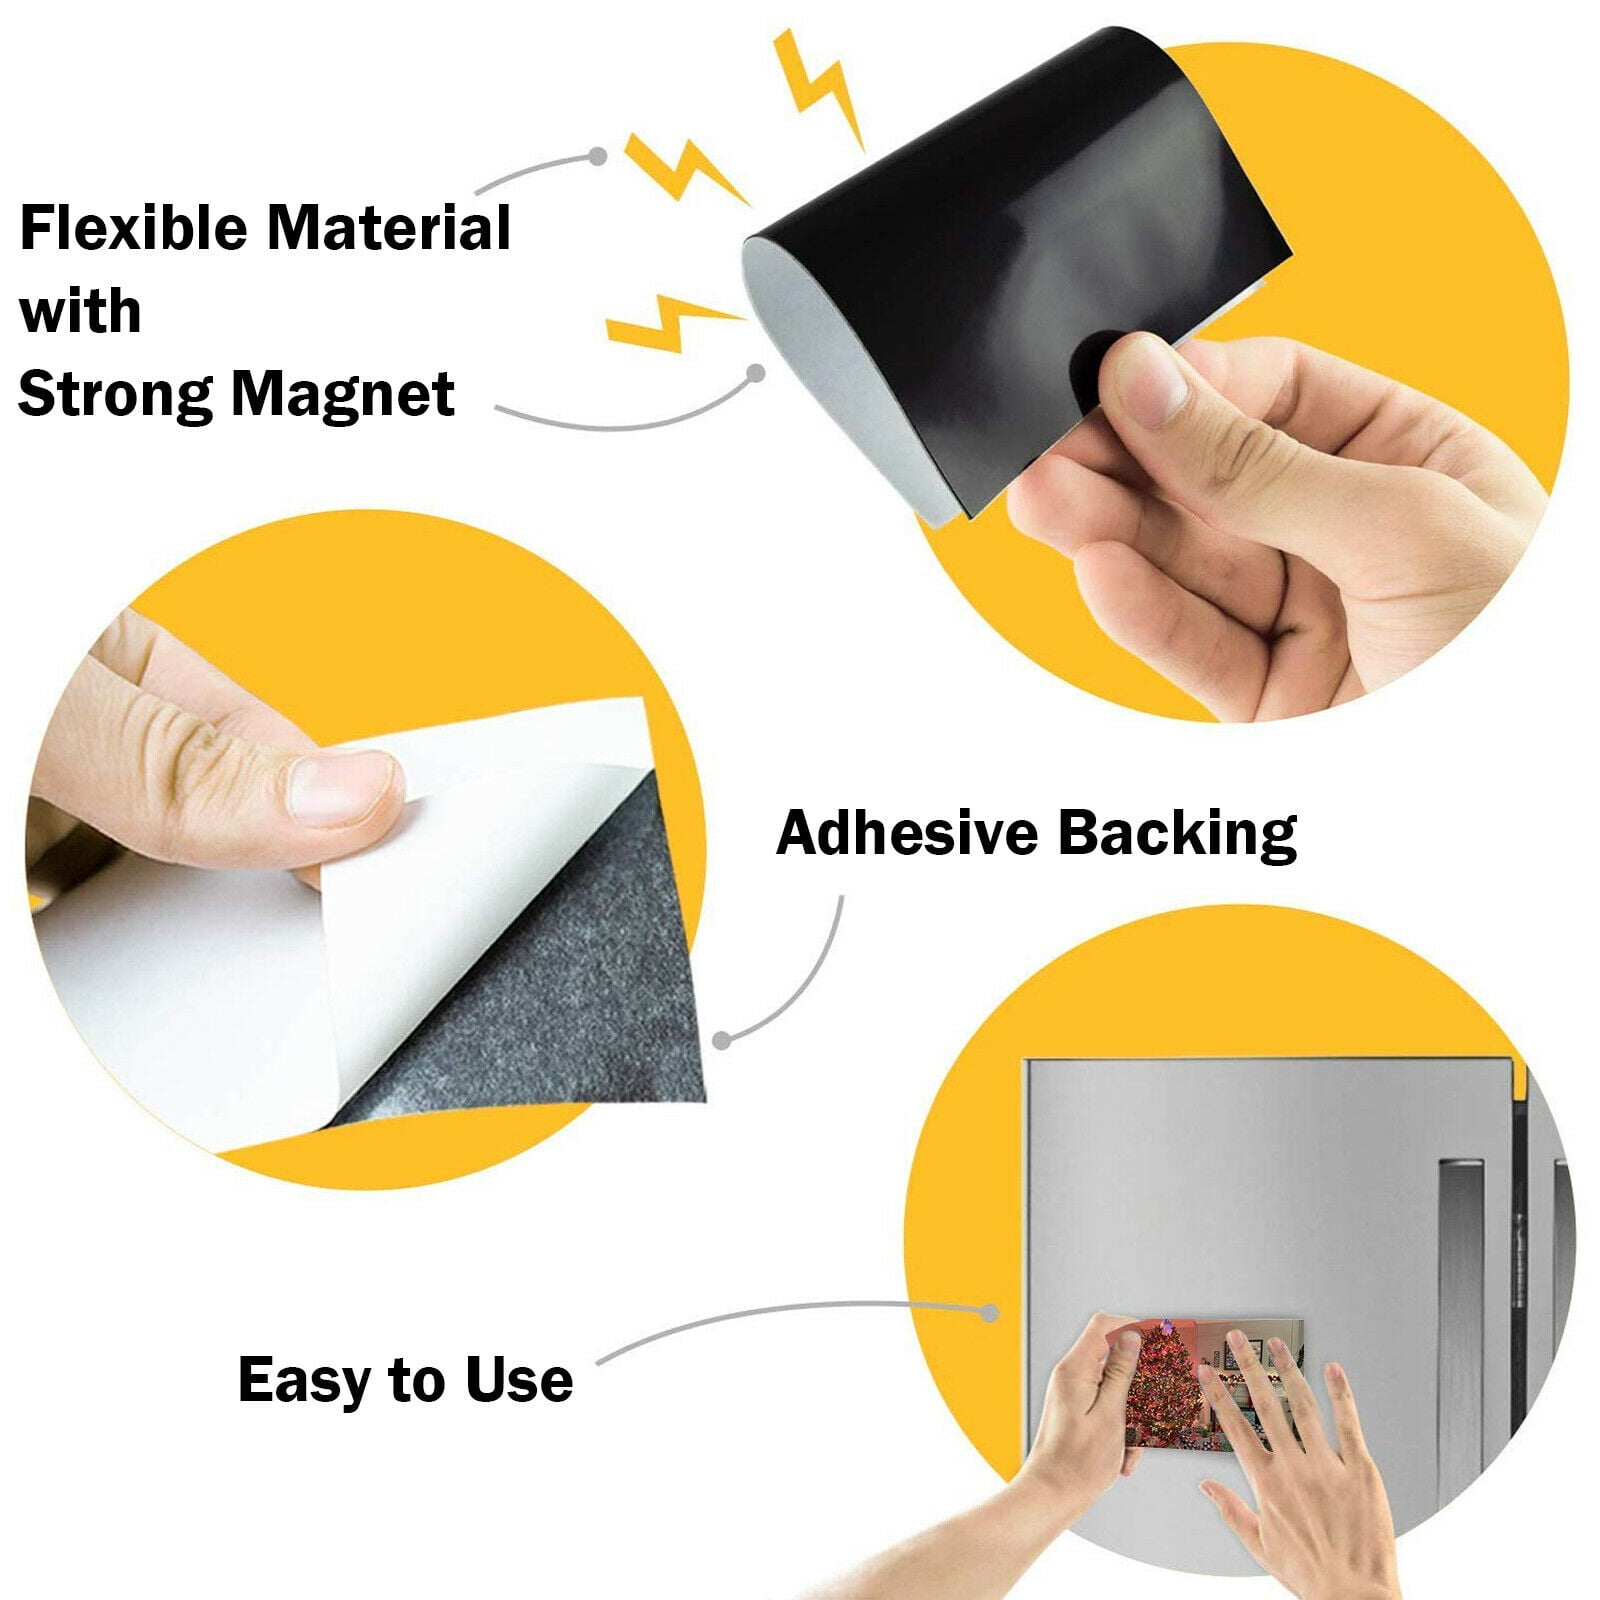 Self-adhesive Magnetic Sheets 6x 4 Standard 